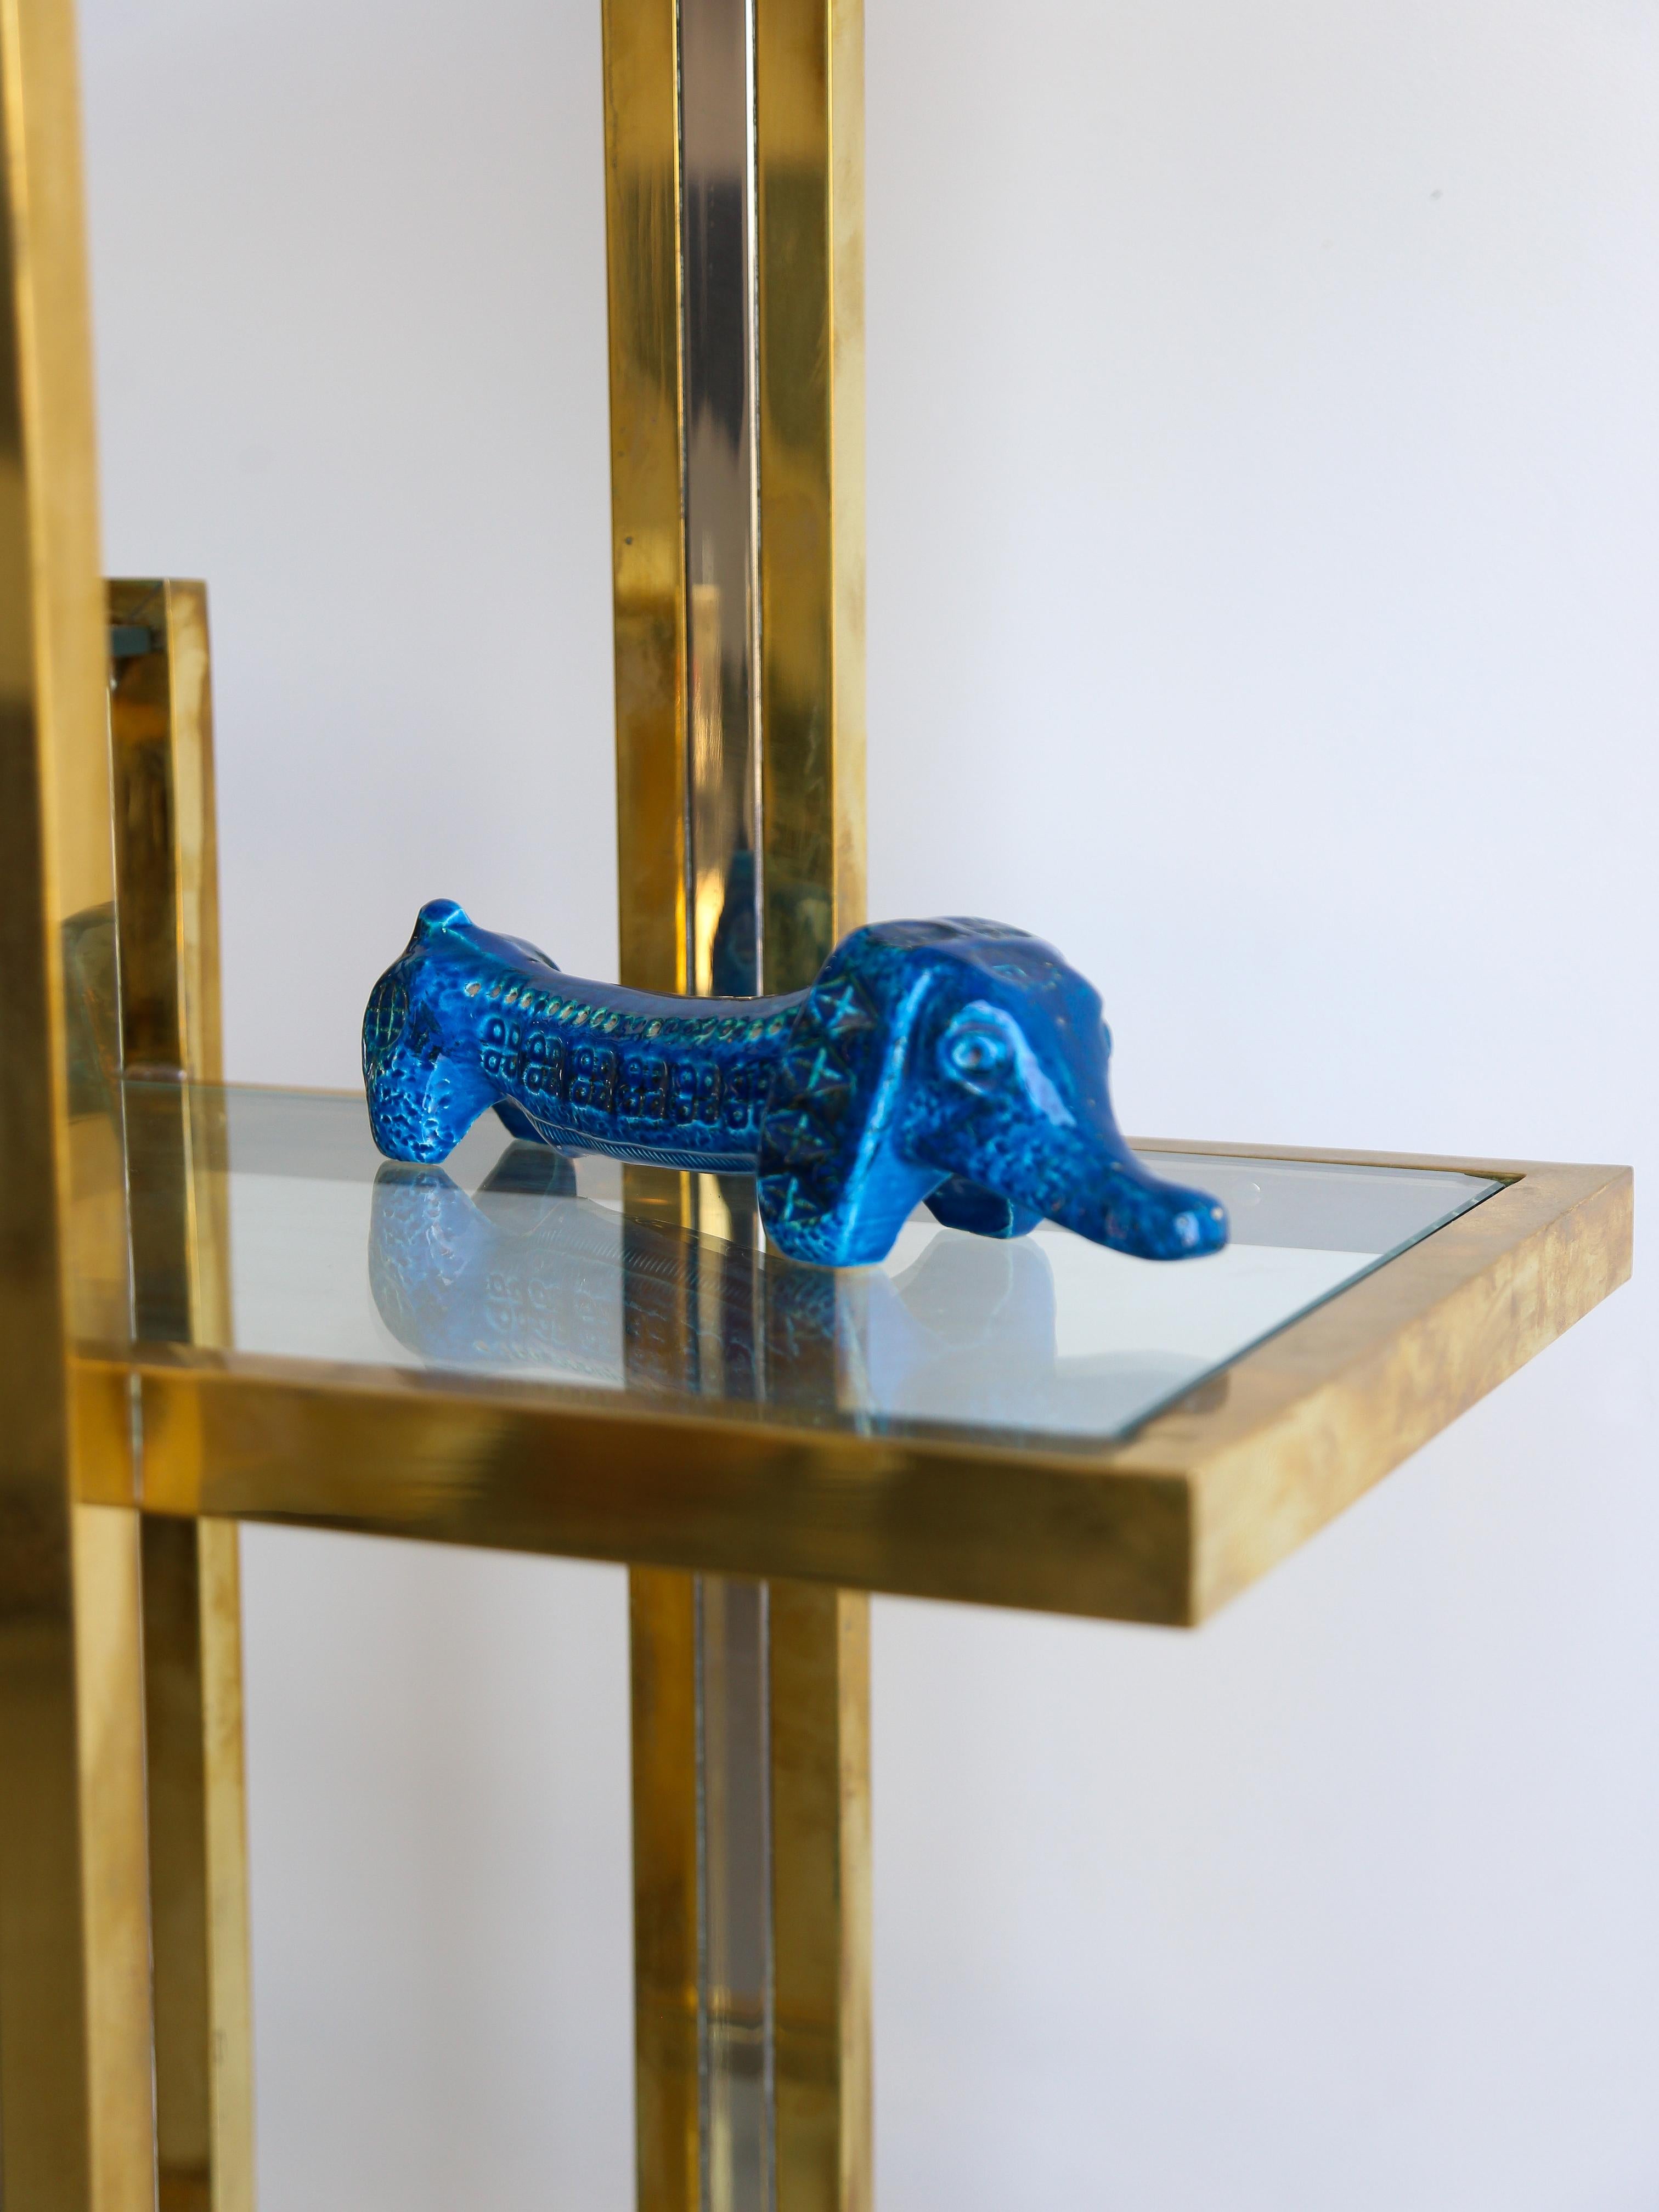 A wonderful piece made by Aldo Londi for Bitossi. A sweet little dachshund in the iconic colours of Rimini Blu. 

Aldo Londi (1911–2003) was an Italian designer who is best known for his work with the Bitossi Ceramiche company. Bitossi Ceramiche is